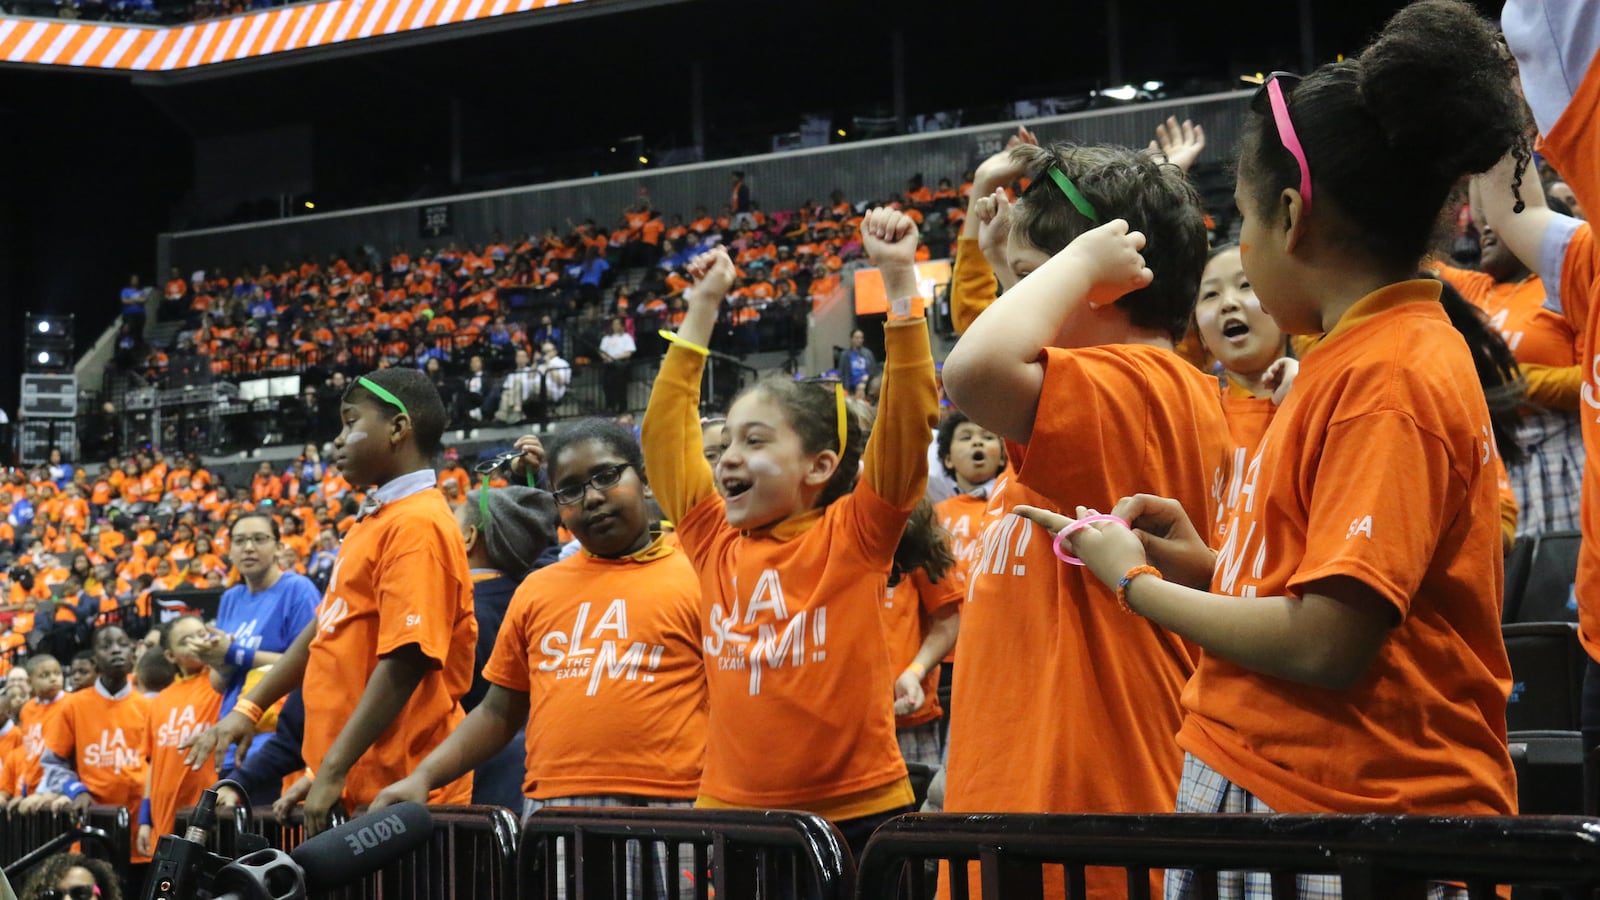 Success Academy hosts its annual "Slam the Exam" rally at the Barclays Center.